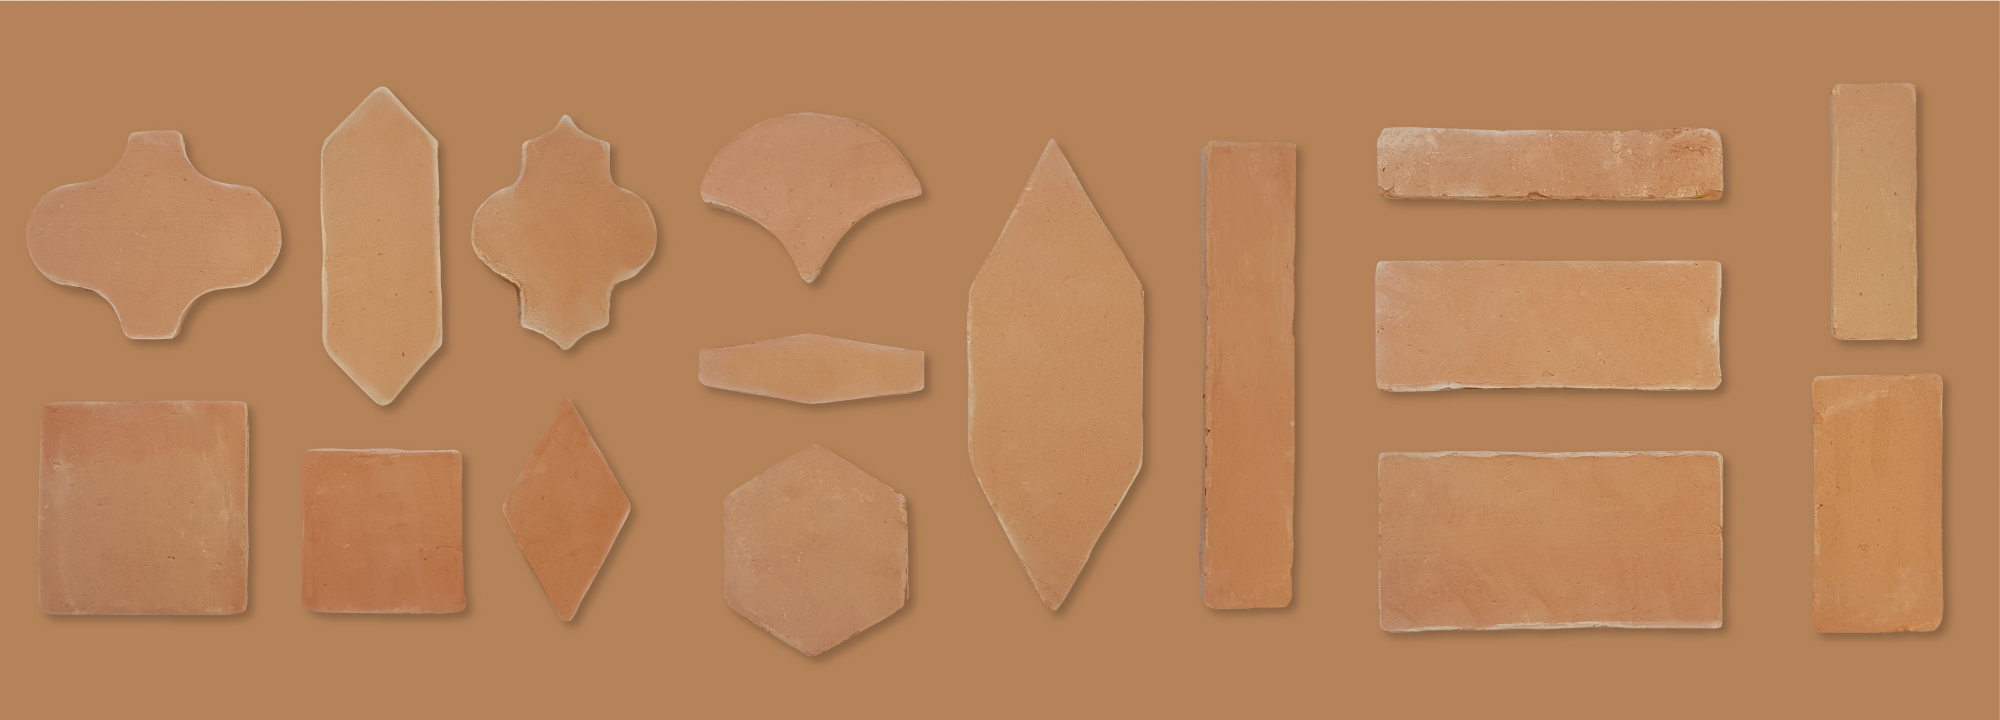 Bespoke projects :: Alteret Ceramics. Handmade Terracotta and Wall Tiles